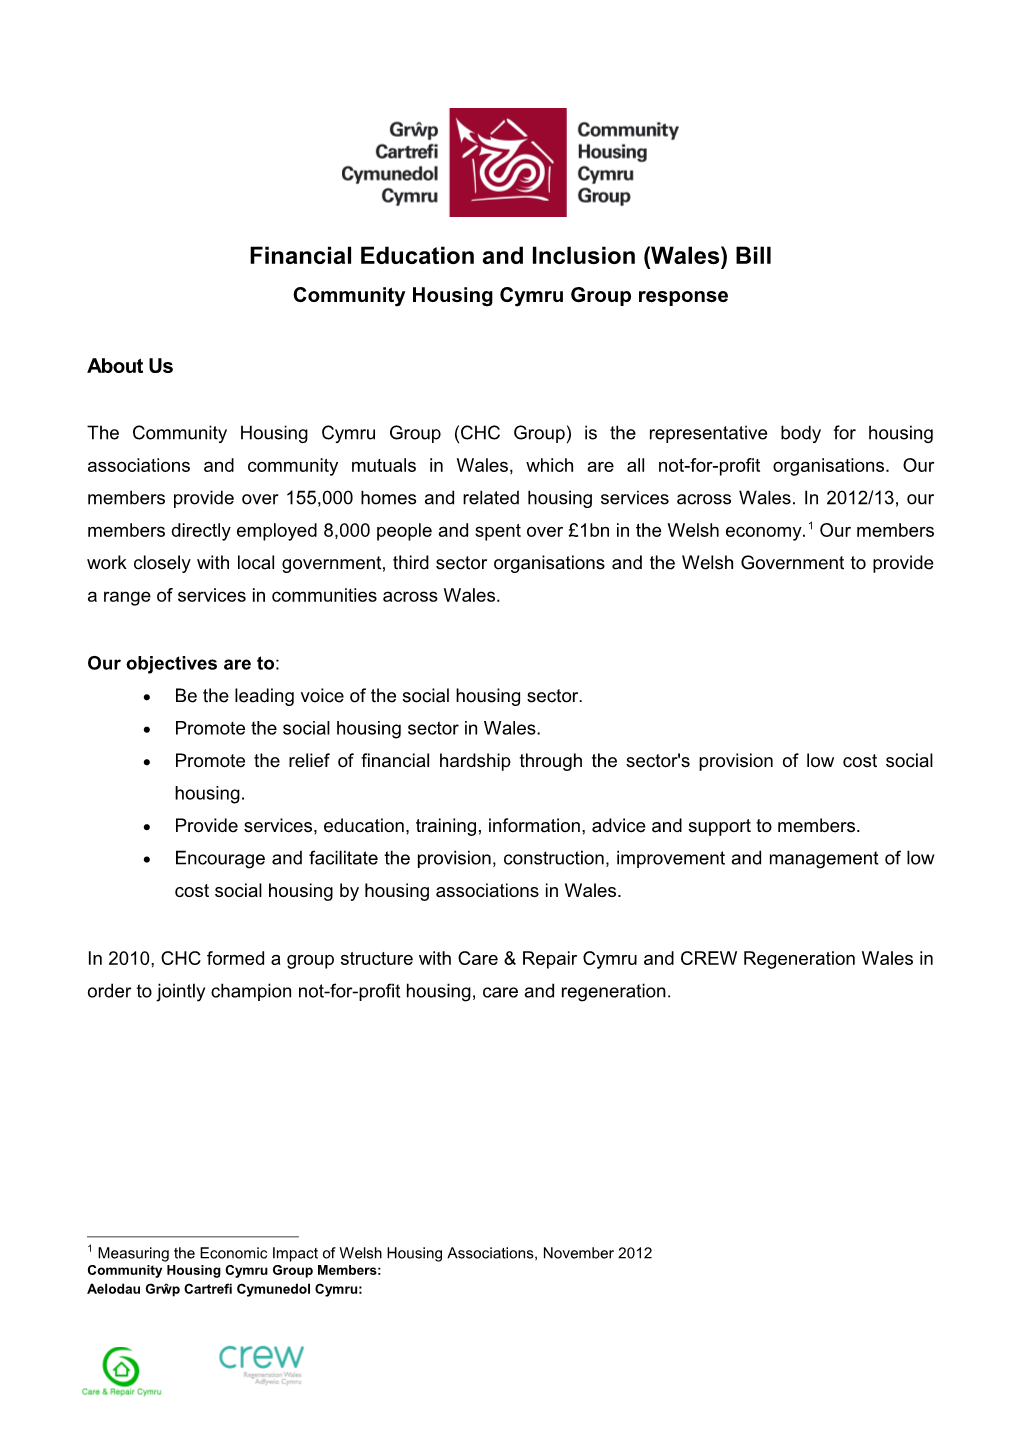 Financial Education and Inclusion (Wales) Bill